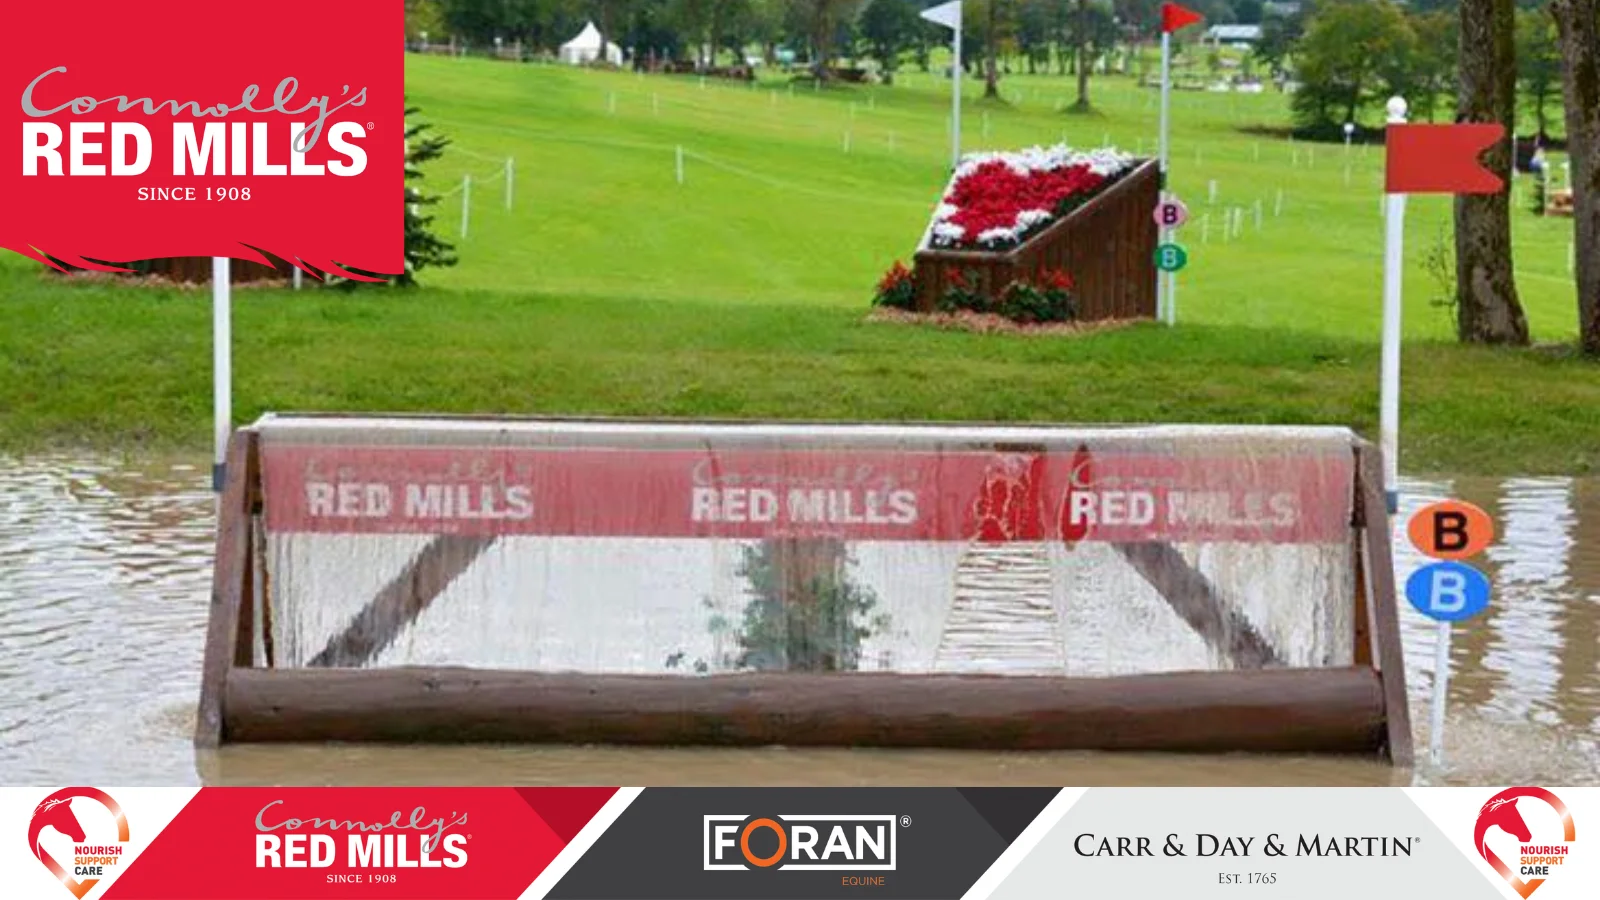 Connolly’s RED MILLS, Foran Equine, and Carr & Day & Martin – The Official Nutrition and Care Partners to Millstreet International Horse Trials